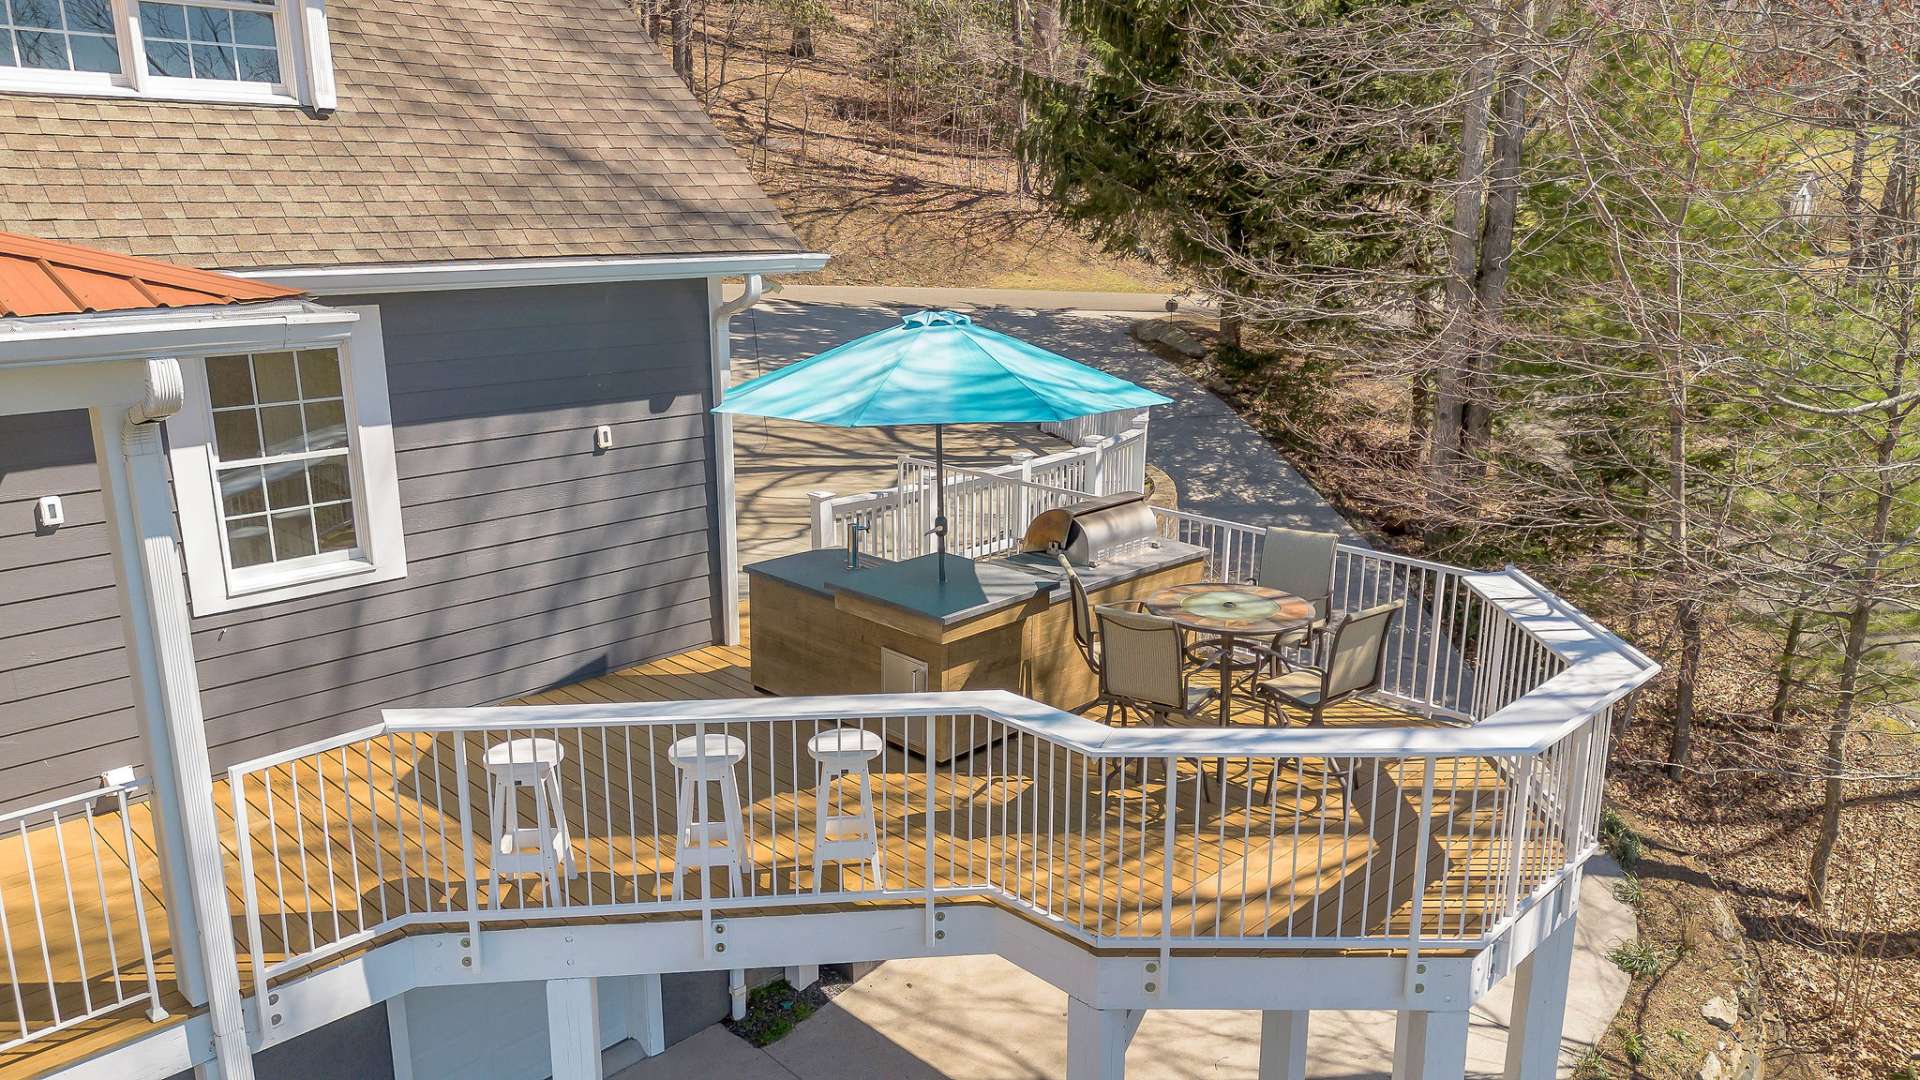 Recently expanded, the open section of the deck has been thoughtfully designed to maximize outdoor living space and enhance the overall functionality of the area. Here, you'll find a state-of-the-art outdoor kitchen offering the ultimate in outdoor culinary convenience and luxury.